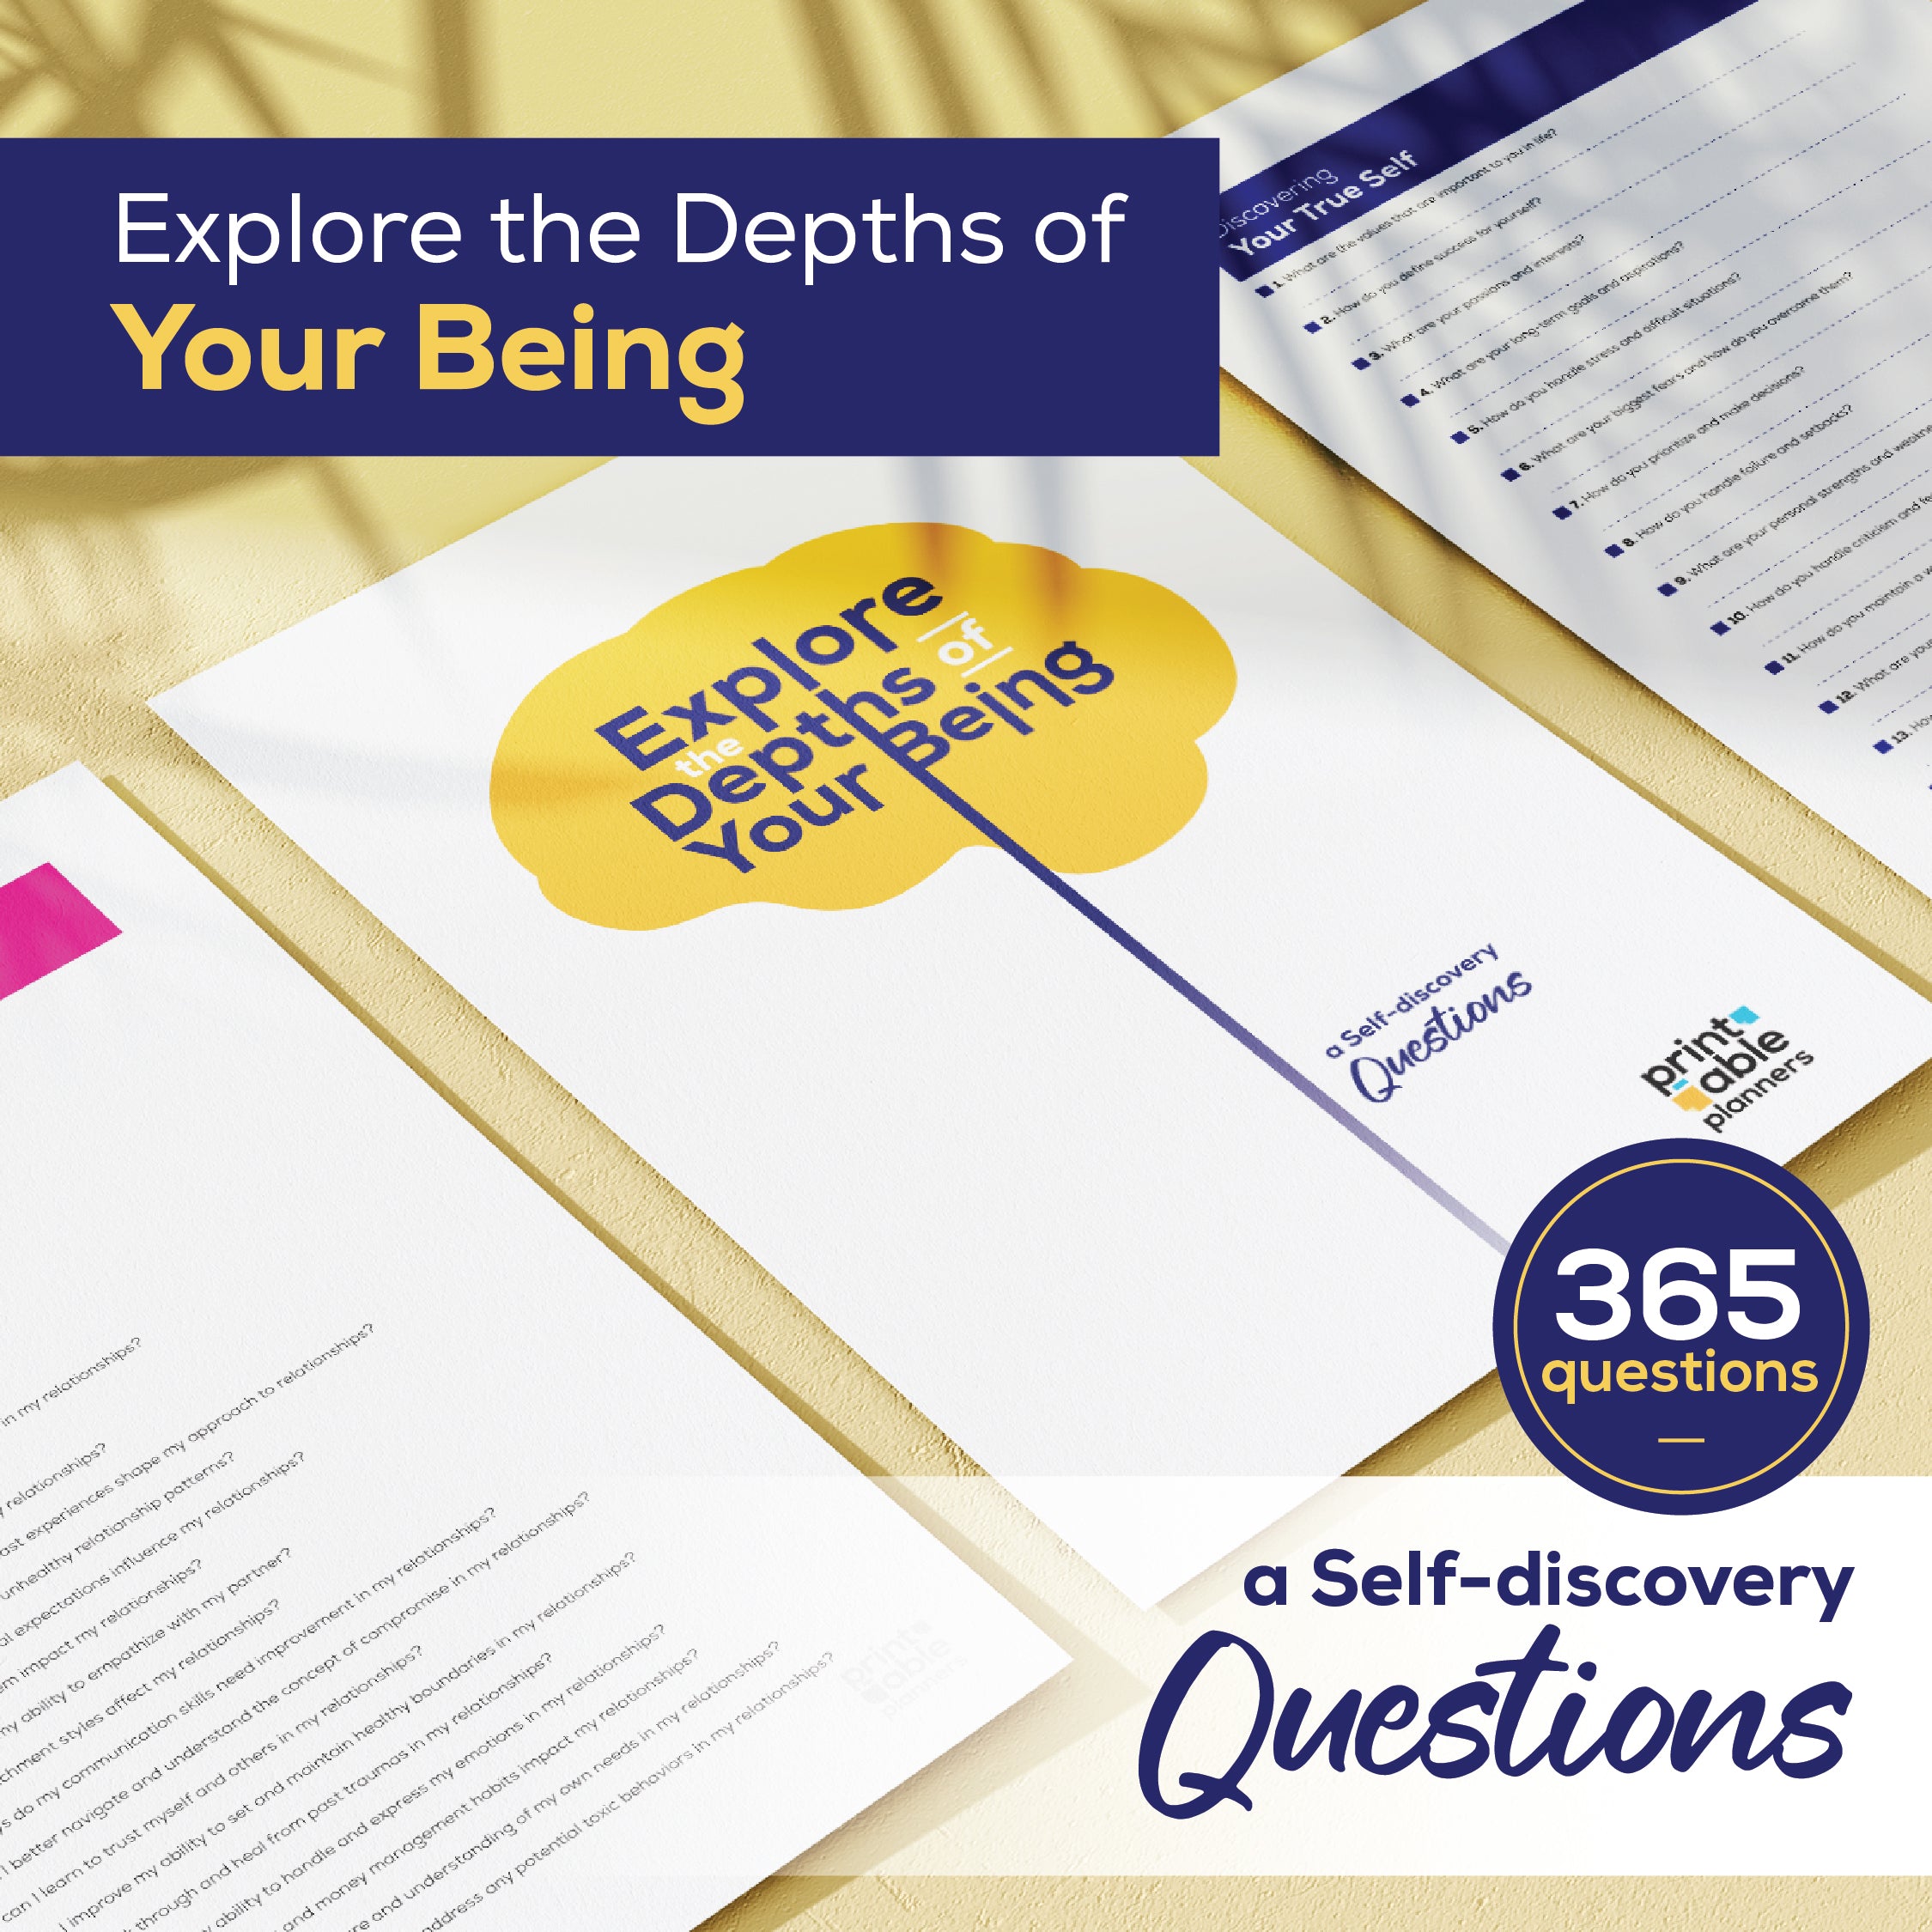 Self Discovery Workbook | Self Improvement | List Of Journal Prompts | Self Discovery Journal | Digital Download